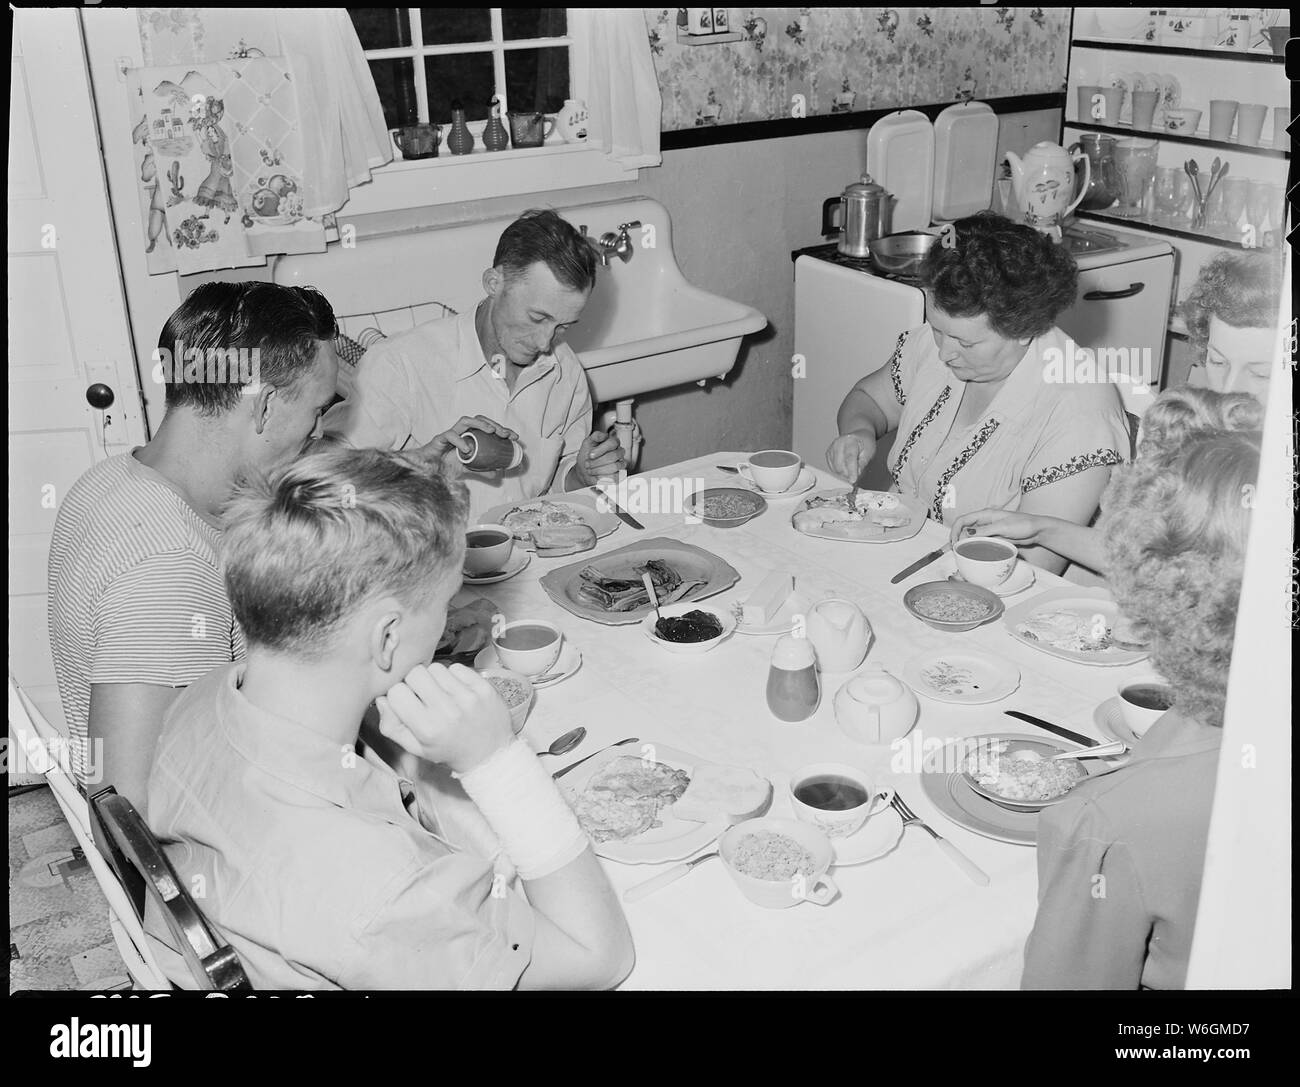 Family of Harry Fain, coal loader, at breakfast. When Mr. Fain works on night shift he has breakfast with the family; otherwise he and Mrs. Fain eat breakfast together at 5:15 A.M. Inland Steel Company, Wheelwright #1 & 2 Mines, Wheelwright, Floyd County, Kentucky. Stock Photo